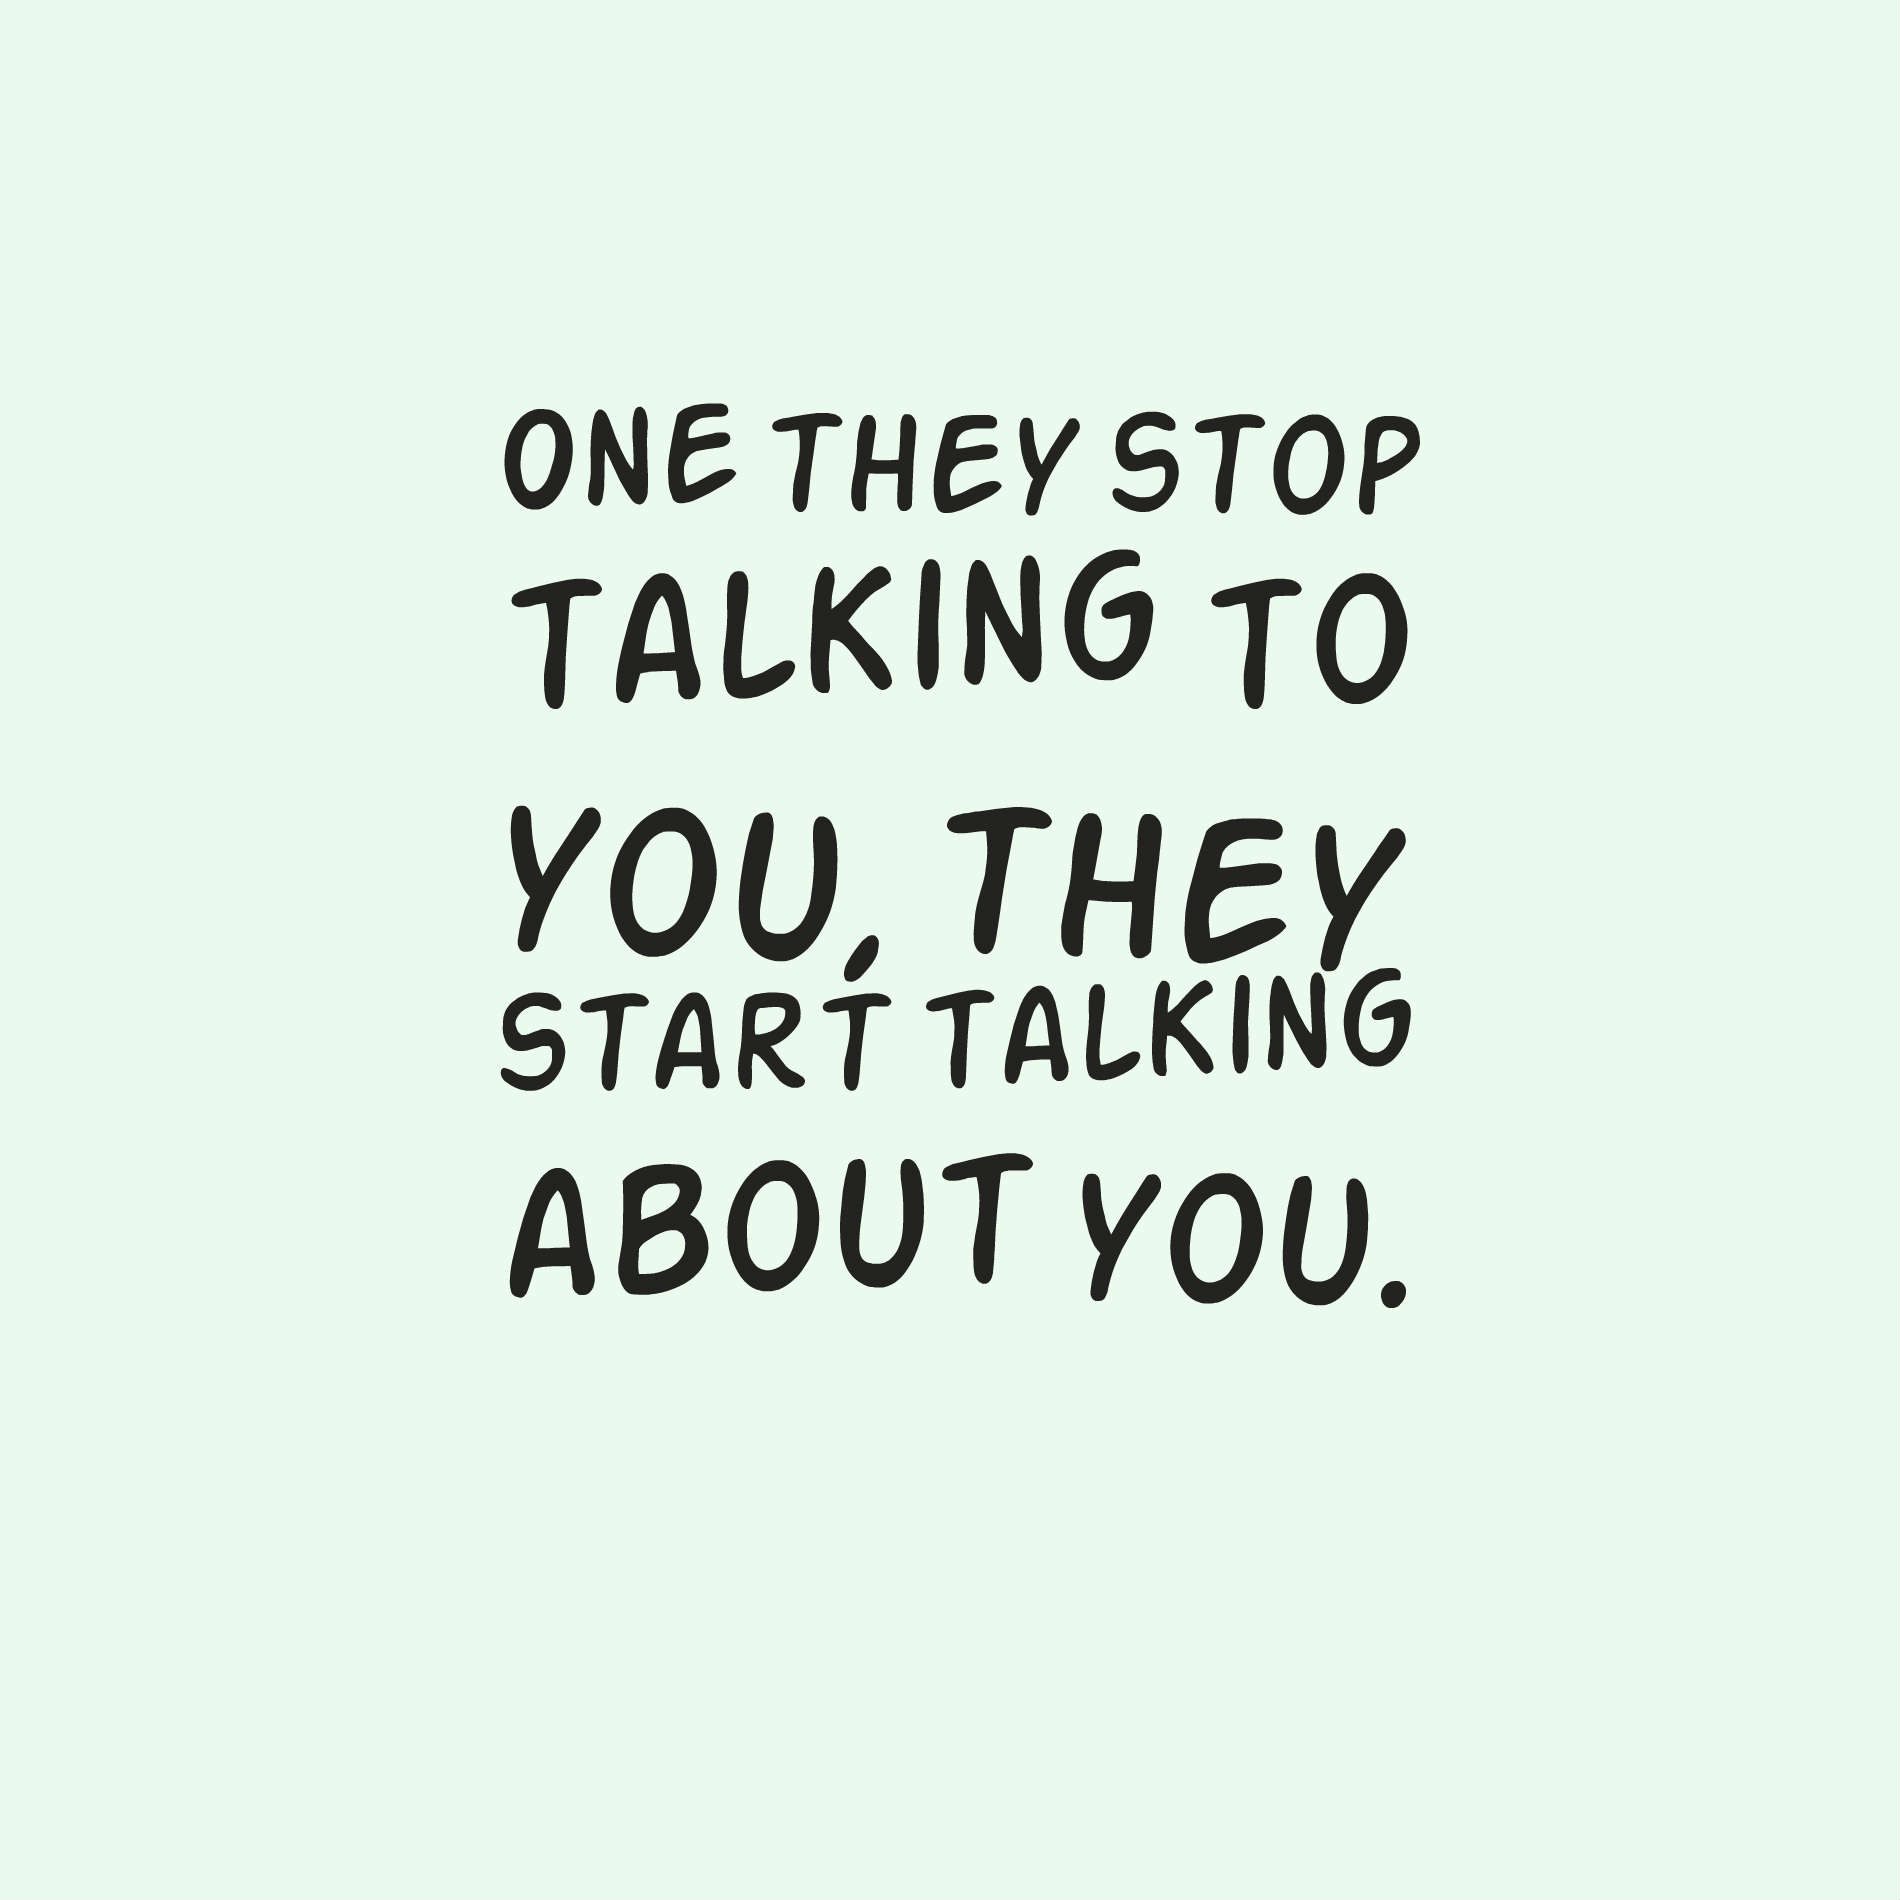 One they stop talking to you, they start talking about you.